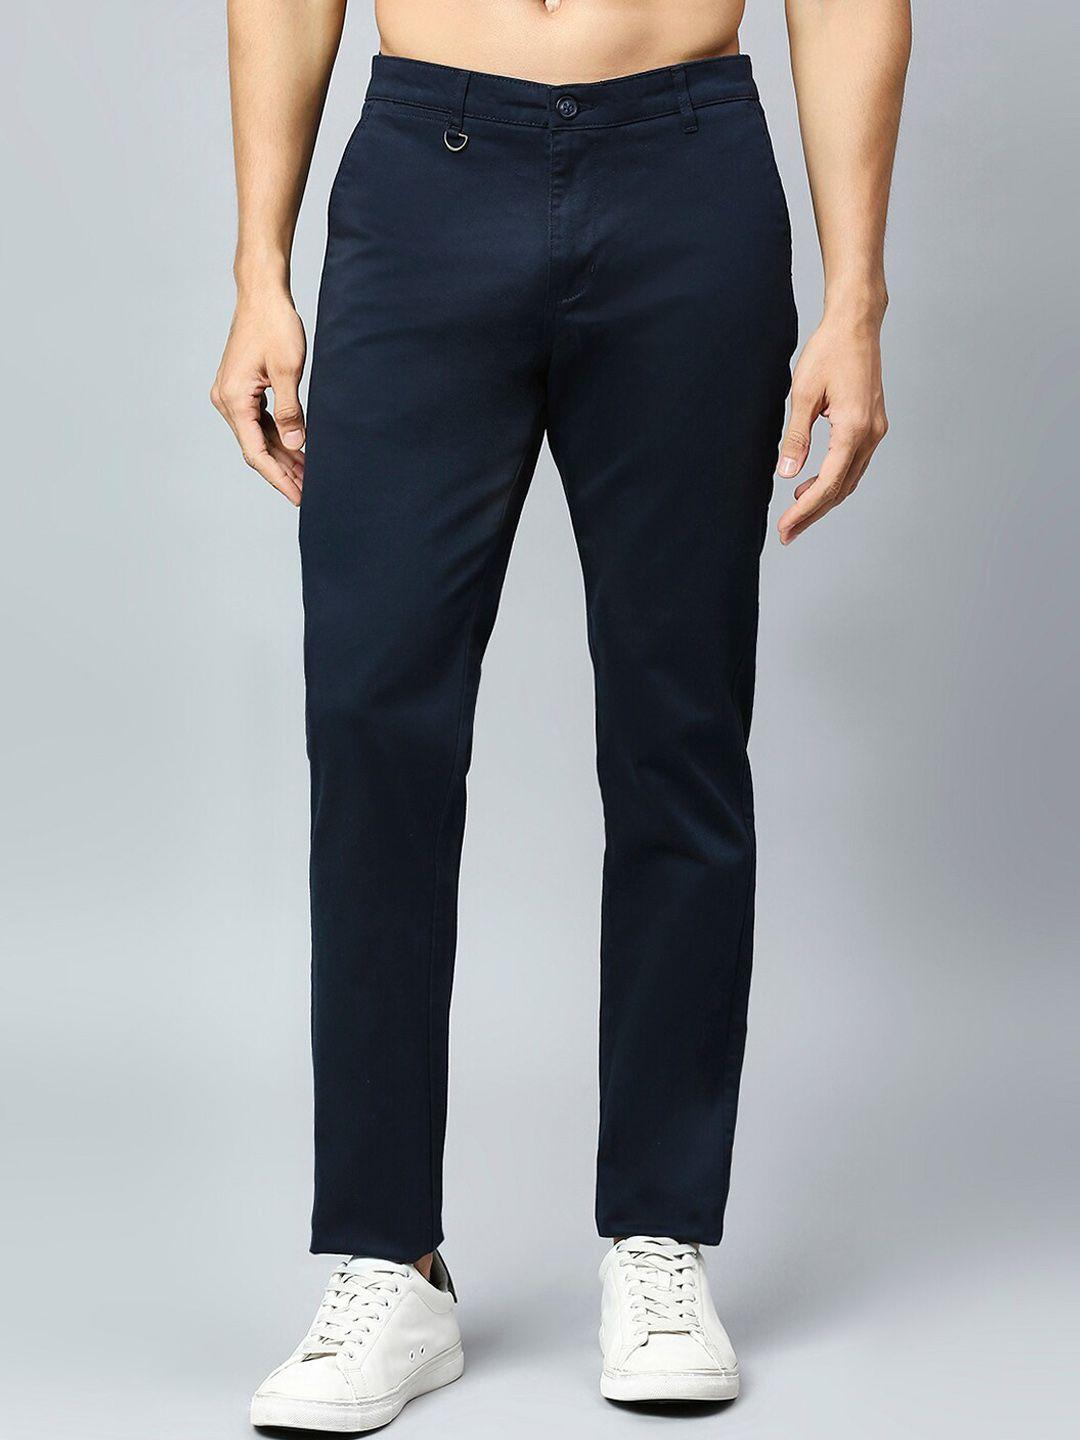 provogue-men-smart-slim-fit-mid-rise-chinos-trousers